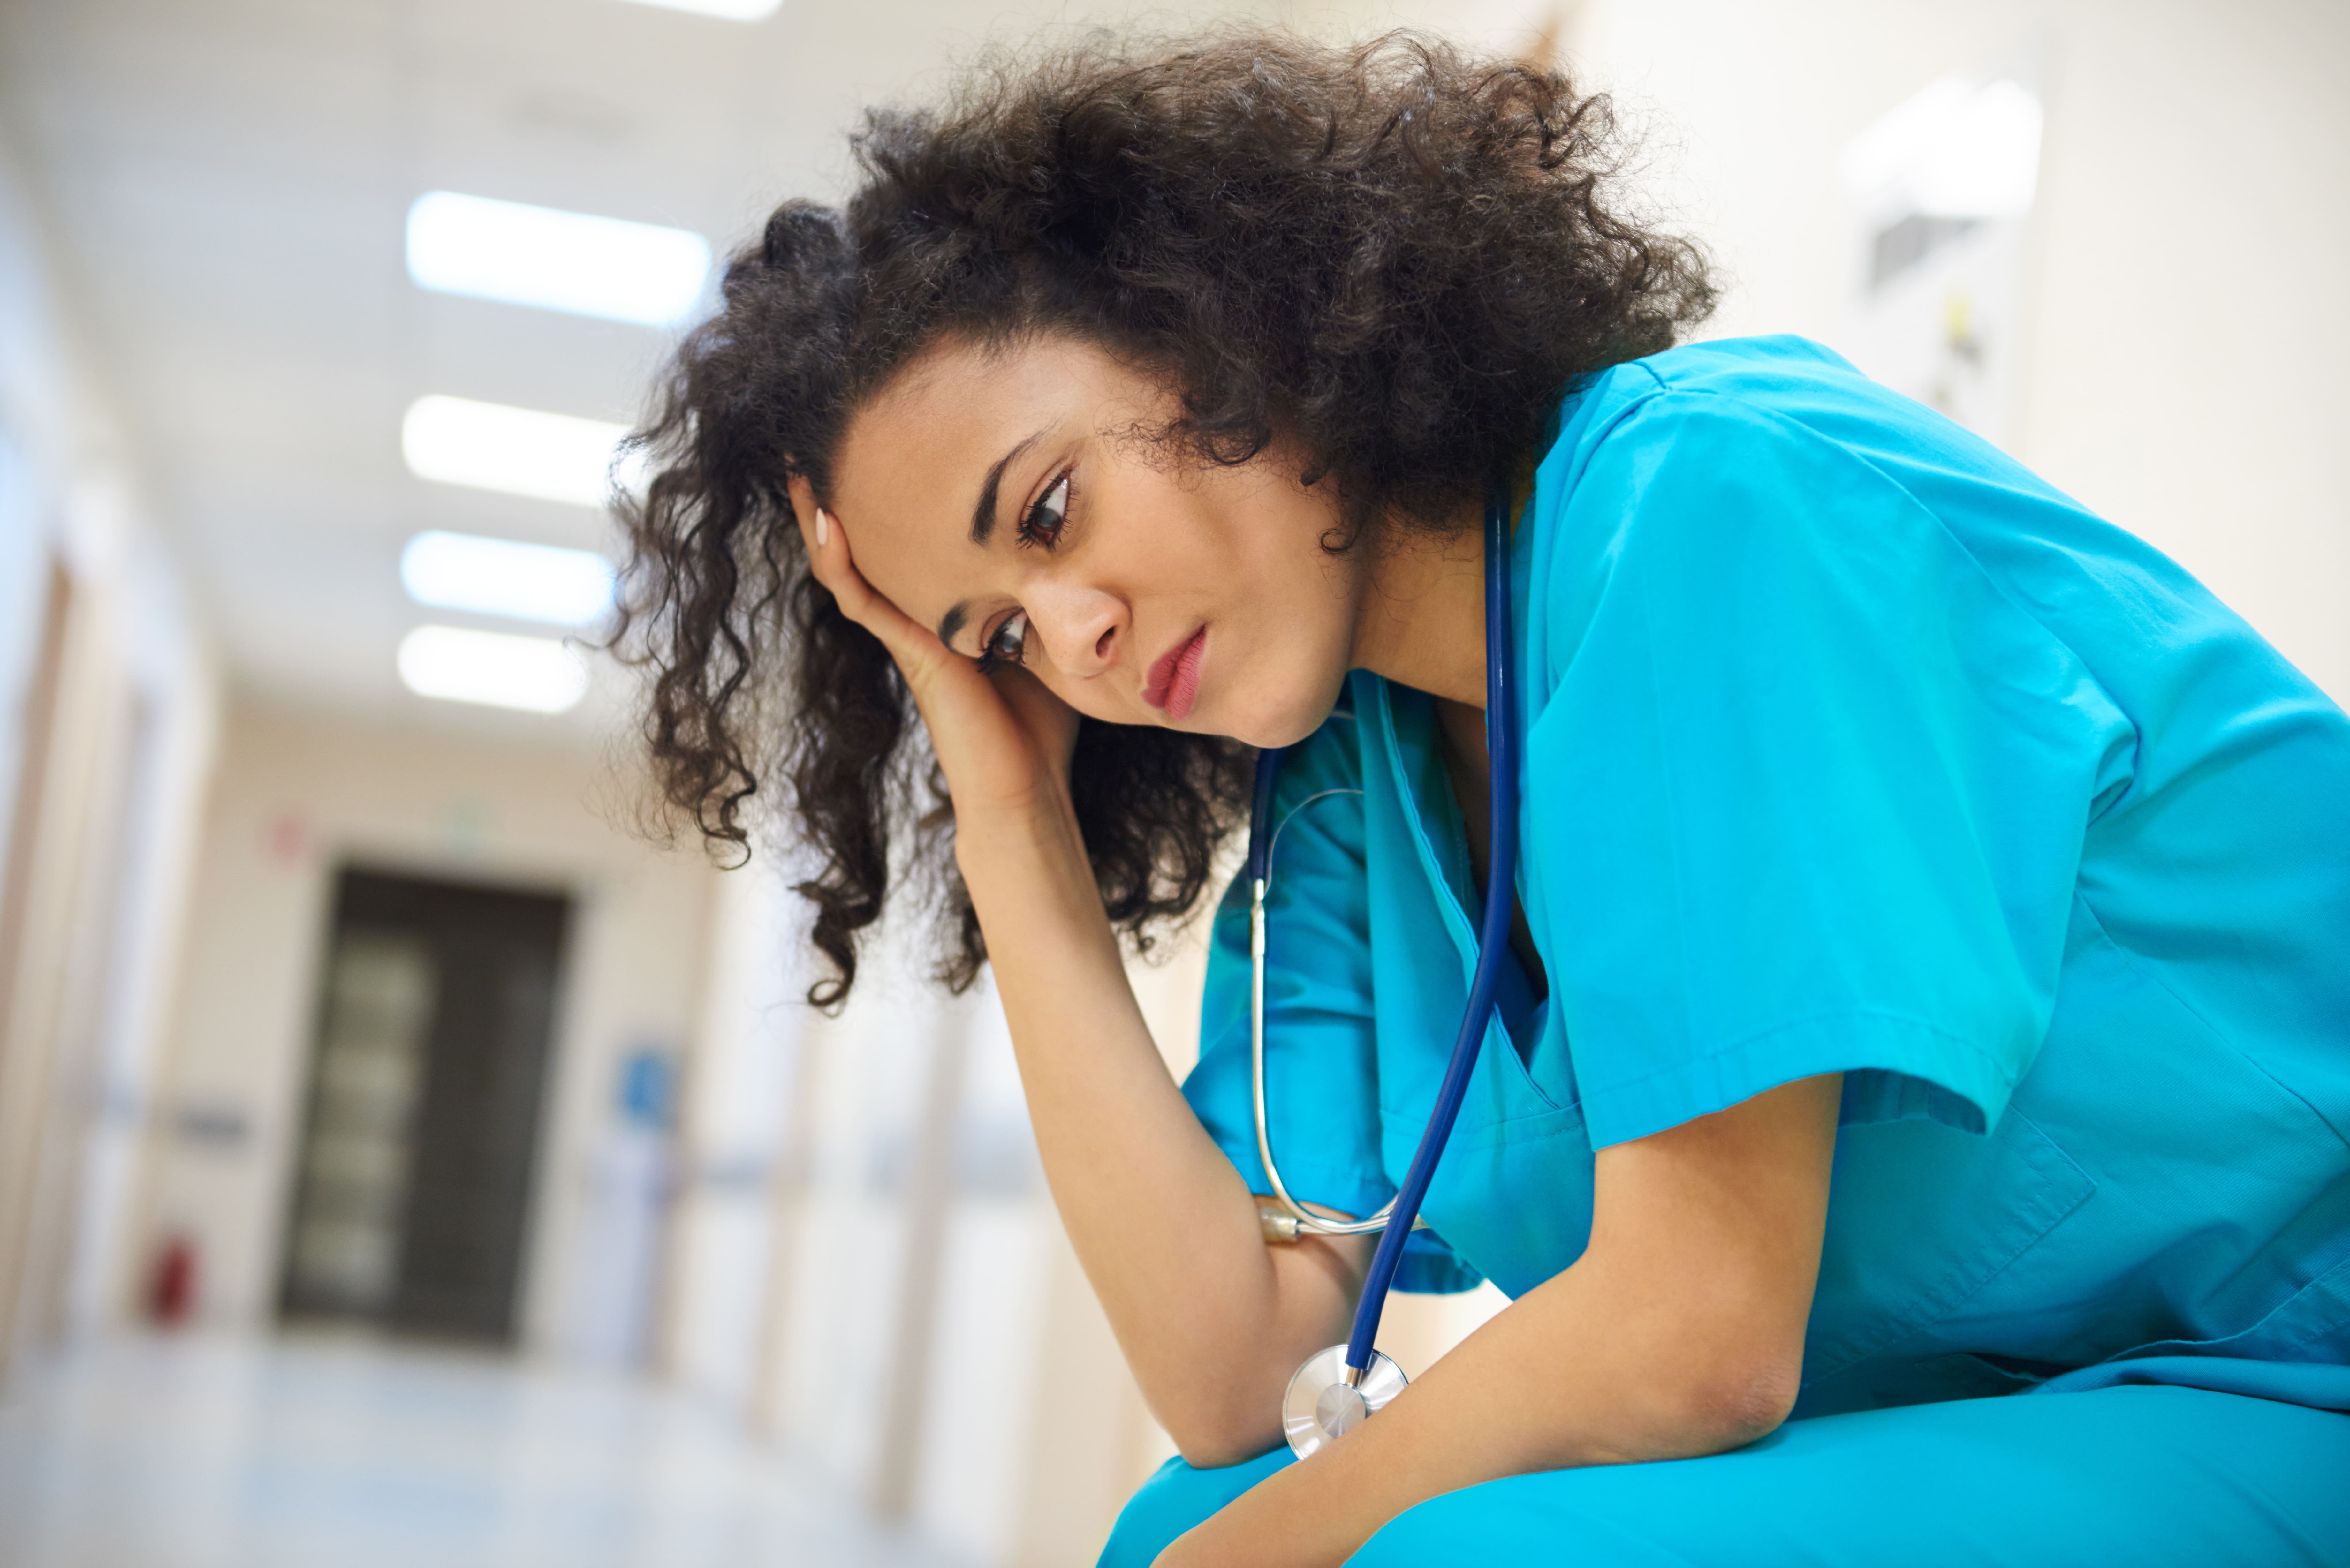 Physician Burnout - A Growing Medical Crisis in the USA